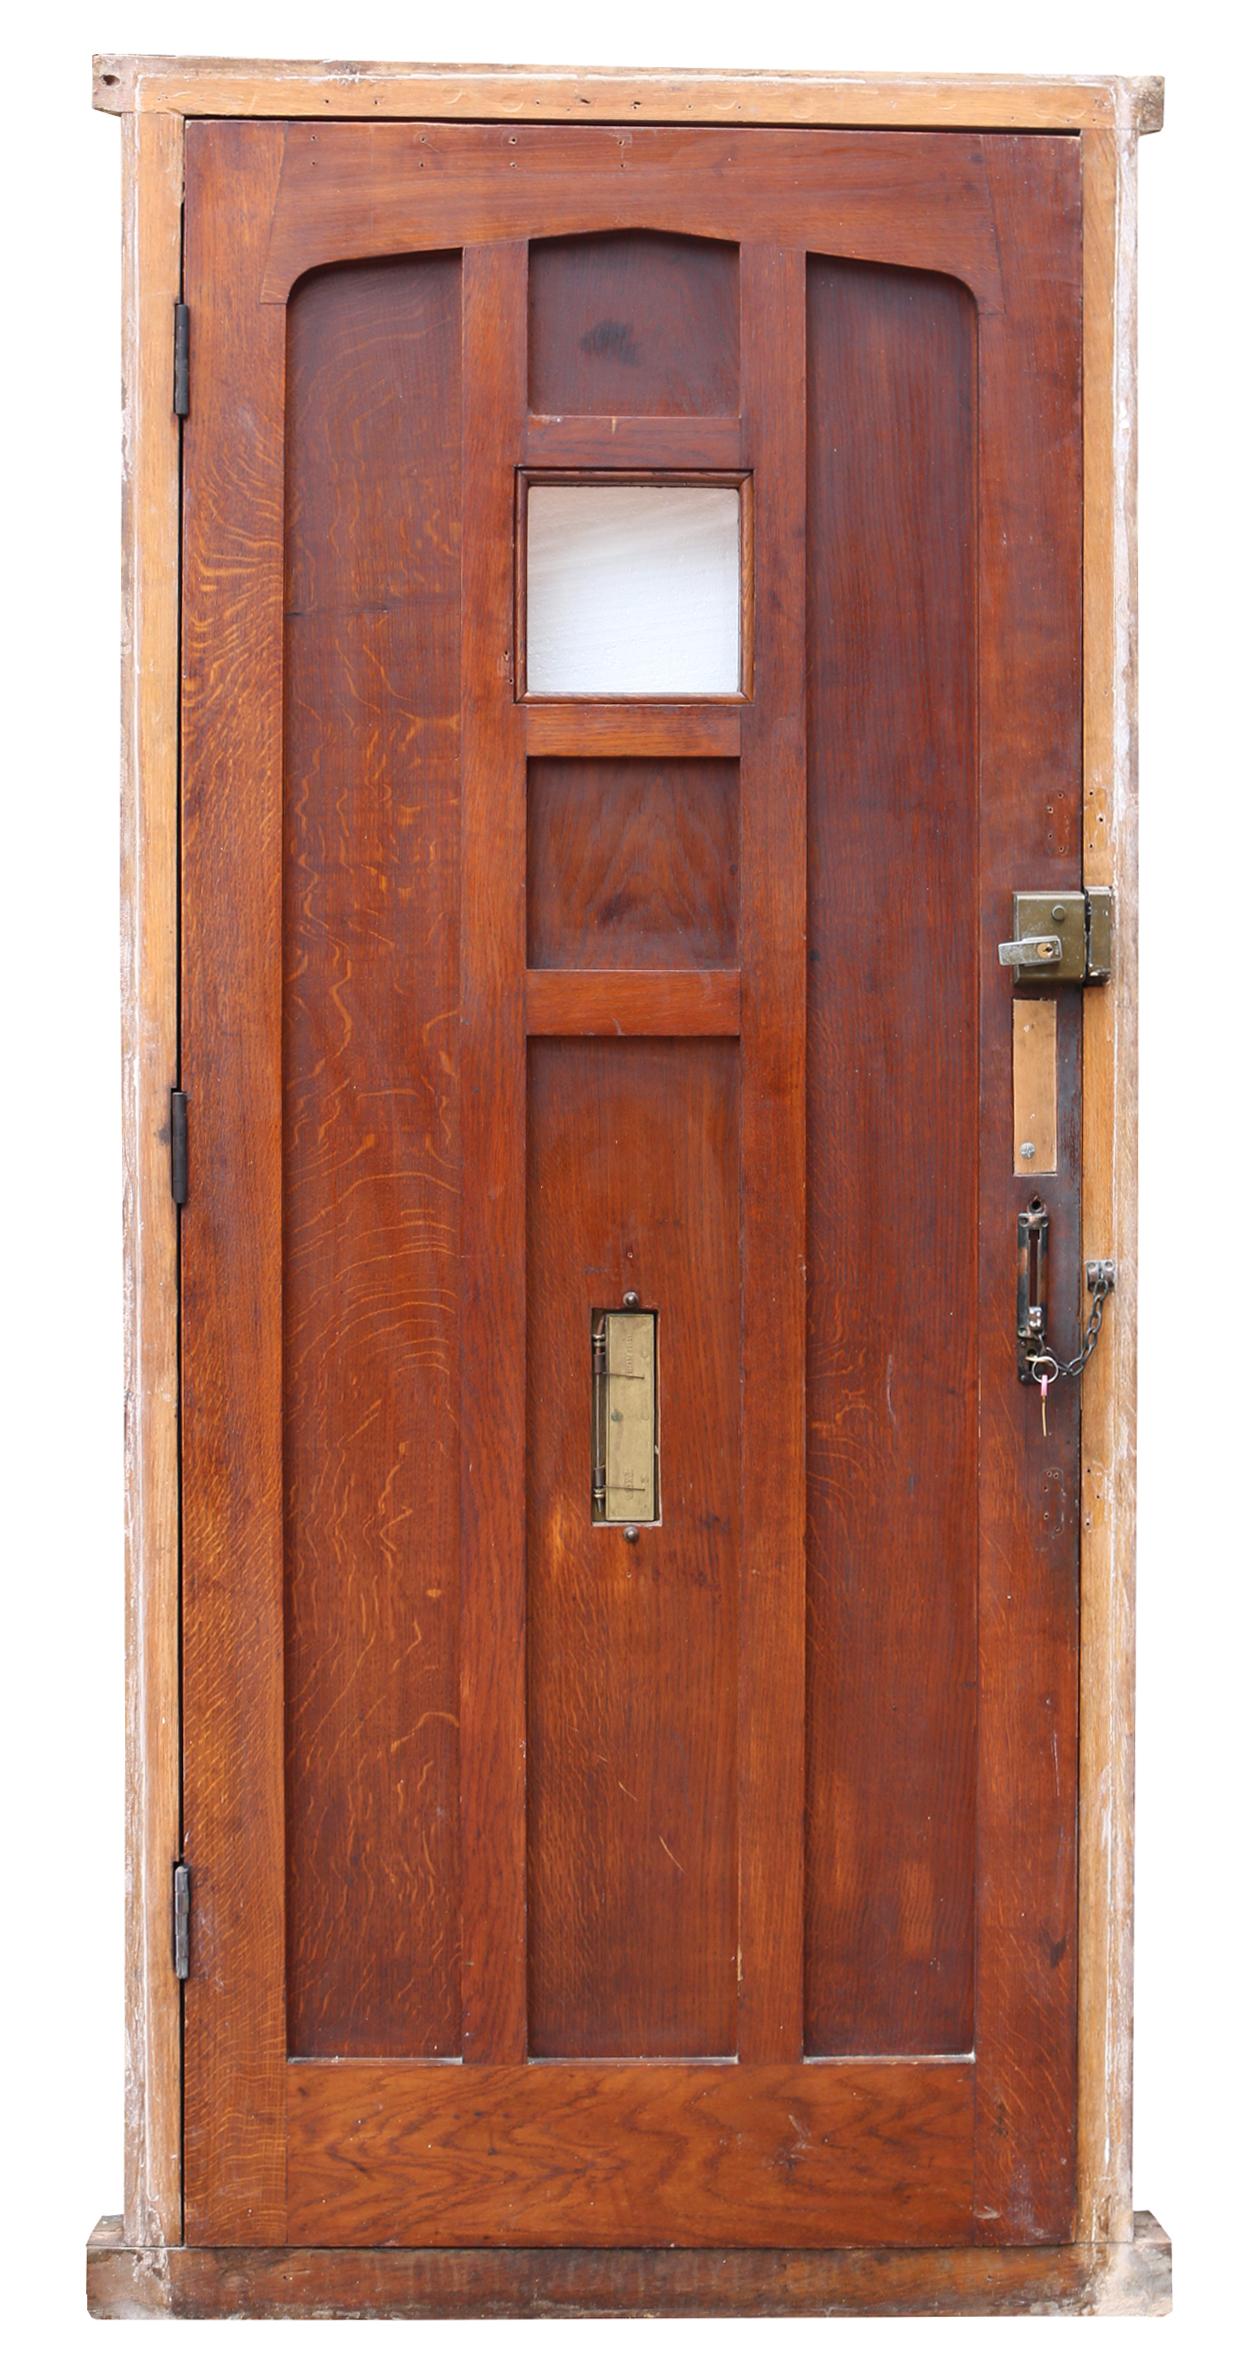 About

This oak door comes with a frame, lock with key, letterbox, push plate and has all hinges present.

Condition report

Excellent structural condition. Various hardware fitted, untested. 

Style

Arts & Crafts 

Date of